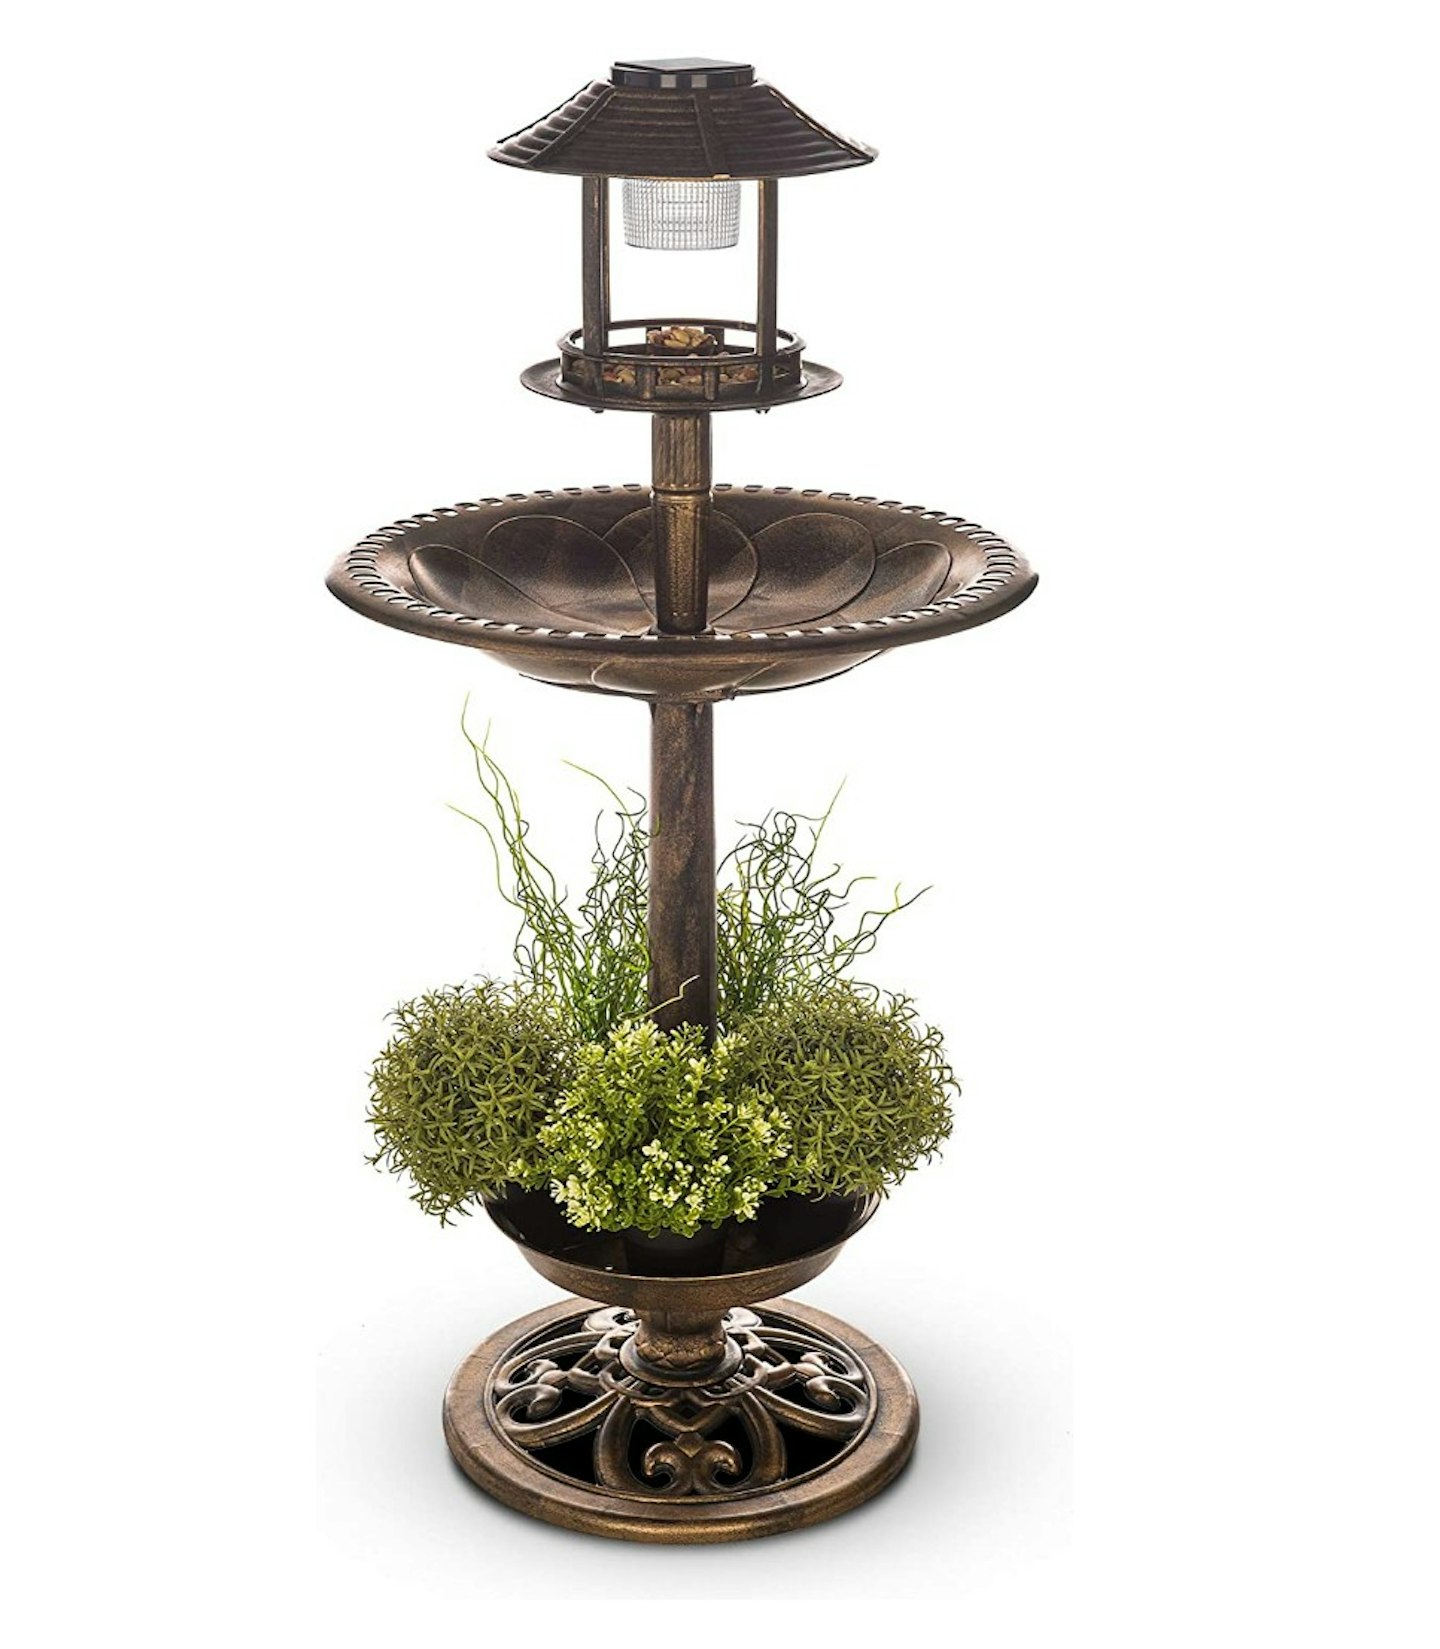  Petlicity Bird Bath and Feeder Station in Ornamental Brass Effect with Planter and Solar Powered Light for Outdoor Garden